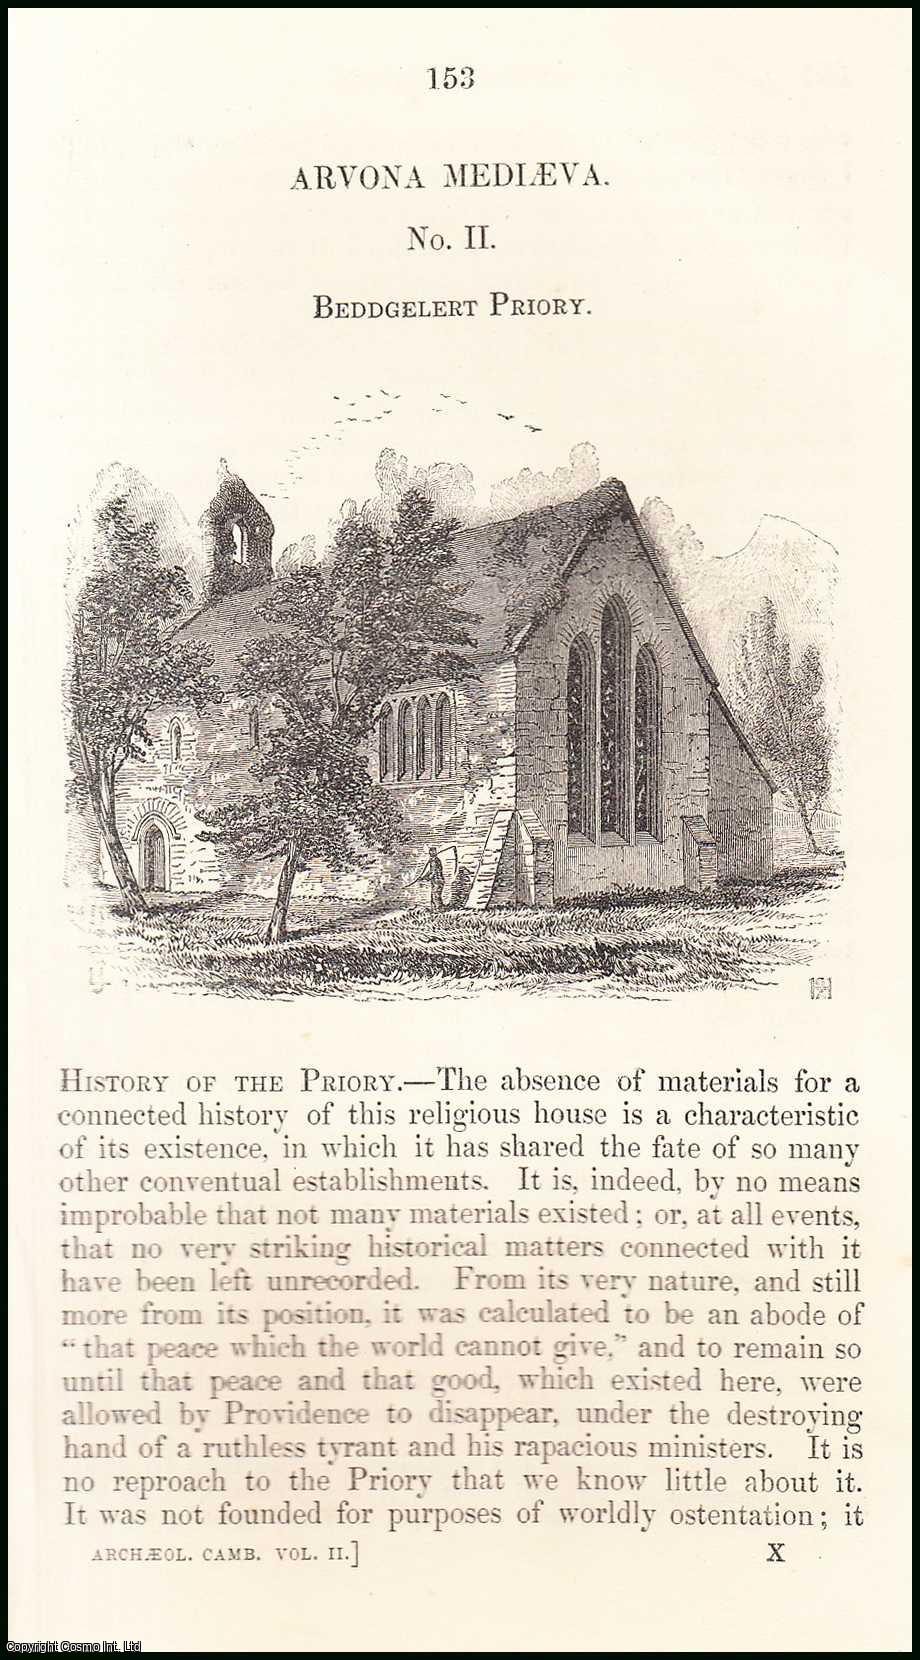 H.L.J. - The History of the Beddgelert Priory. An original article from the Archaeologia Cambrensis, a Record of The Antiquities of Wales & its Marches, 1847.